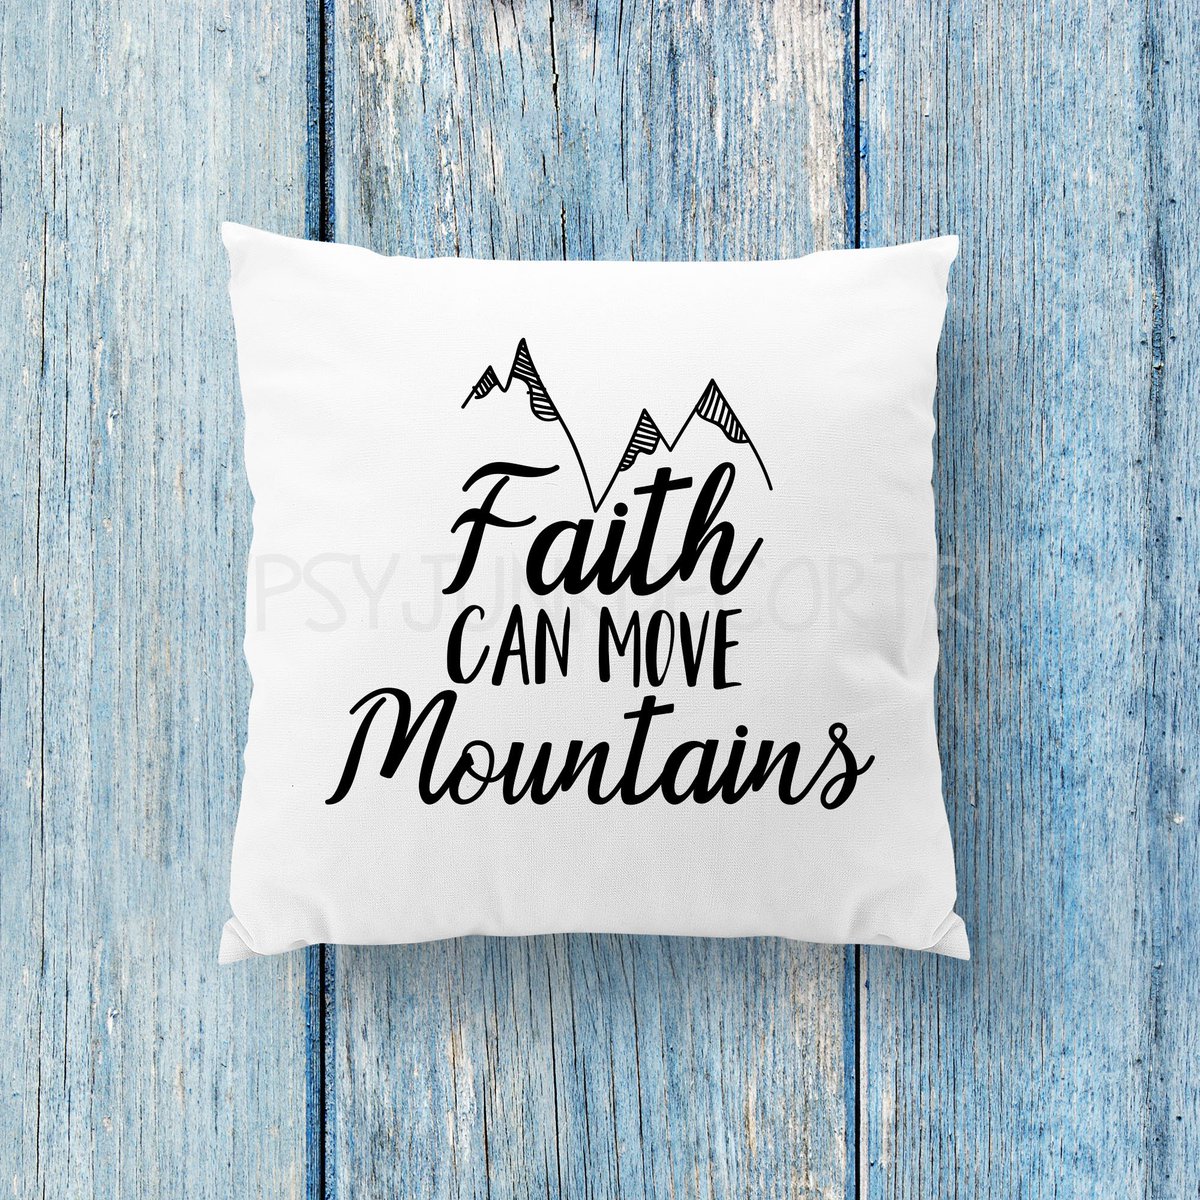 Enjoy camping or updating your decor with this super cute woodland inspirational pillow. ow.ly/vevG30nXp4h #camping #inspirationalgifts #inspire #campingdecor #woodlanddecor #homegoods #decorstyle #woodland #inspire #rebelsandrosesboutique